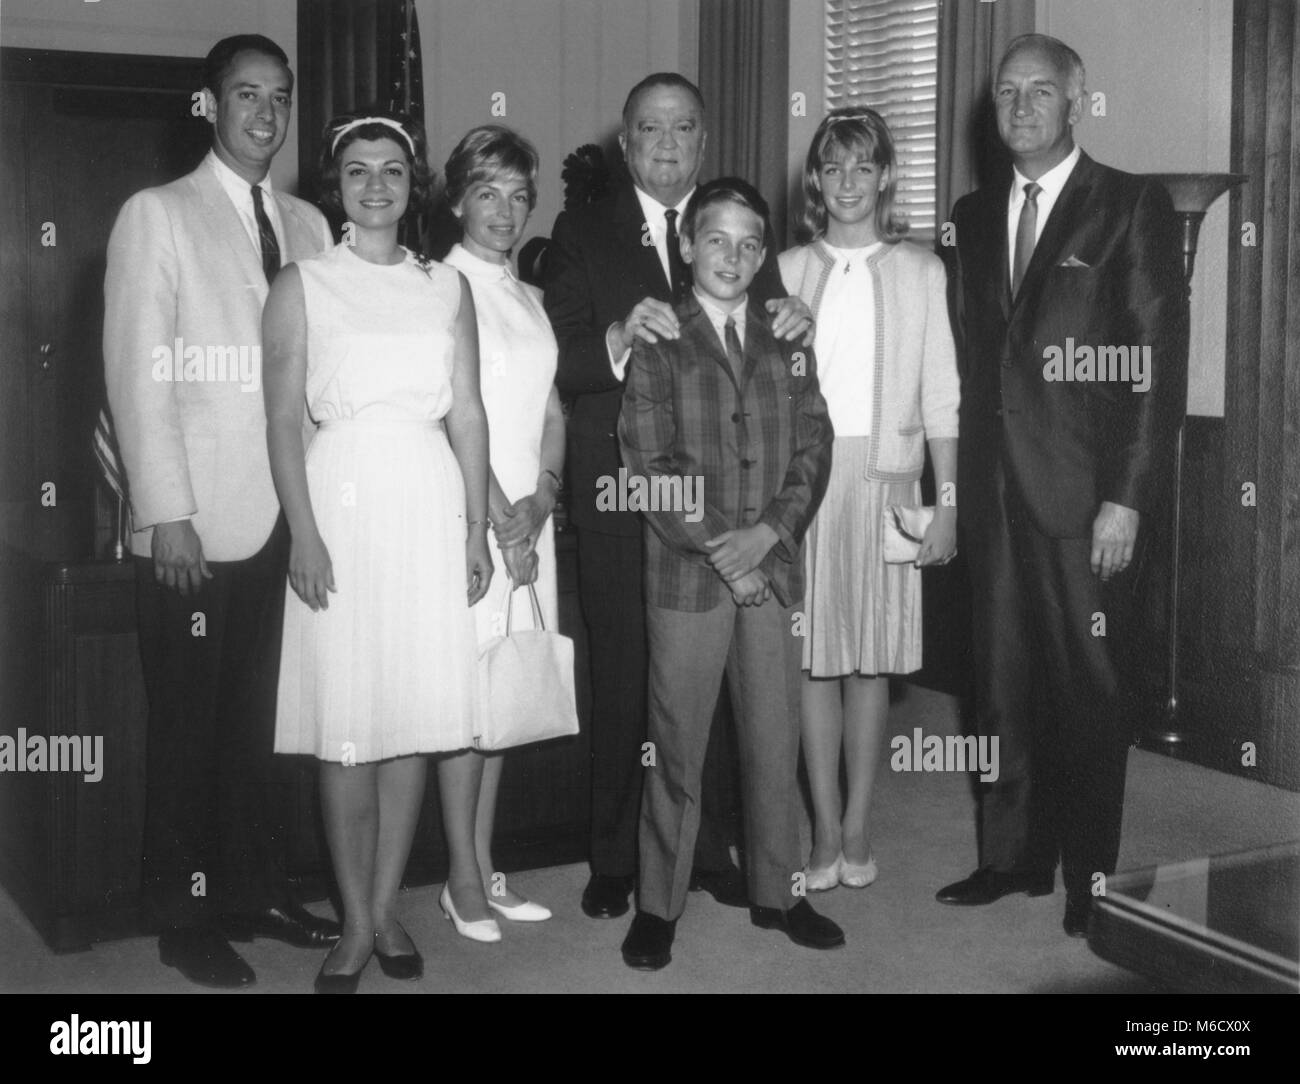 FBI Director J. Edgar Hoover was photographed with ABC sportscaster Tom  Harmon, ABC writer Robert Sizer and their families. Shown in Mr. Hoover's  office were: Mr. Sizer, Mrs. Sizer, Mrs. Harmon, Mr.